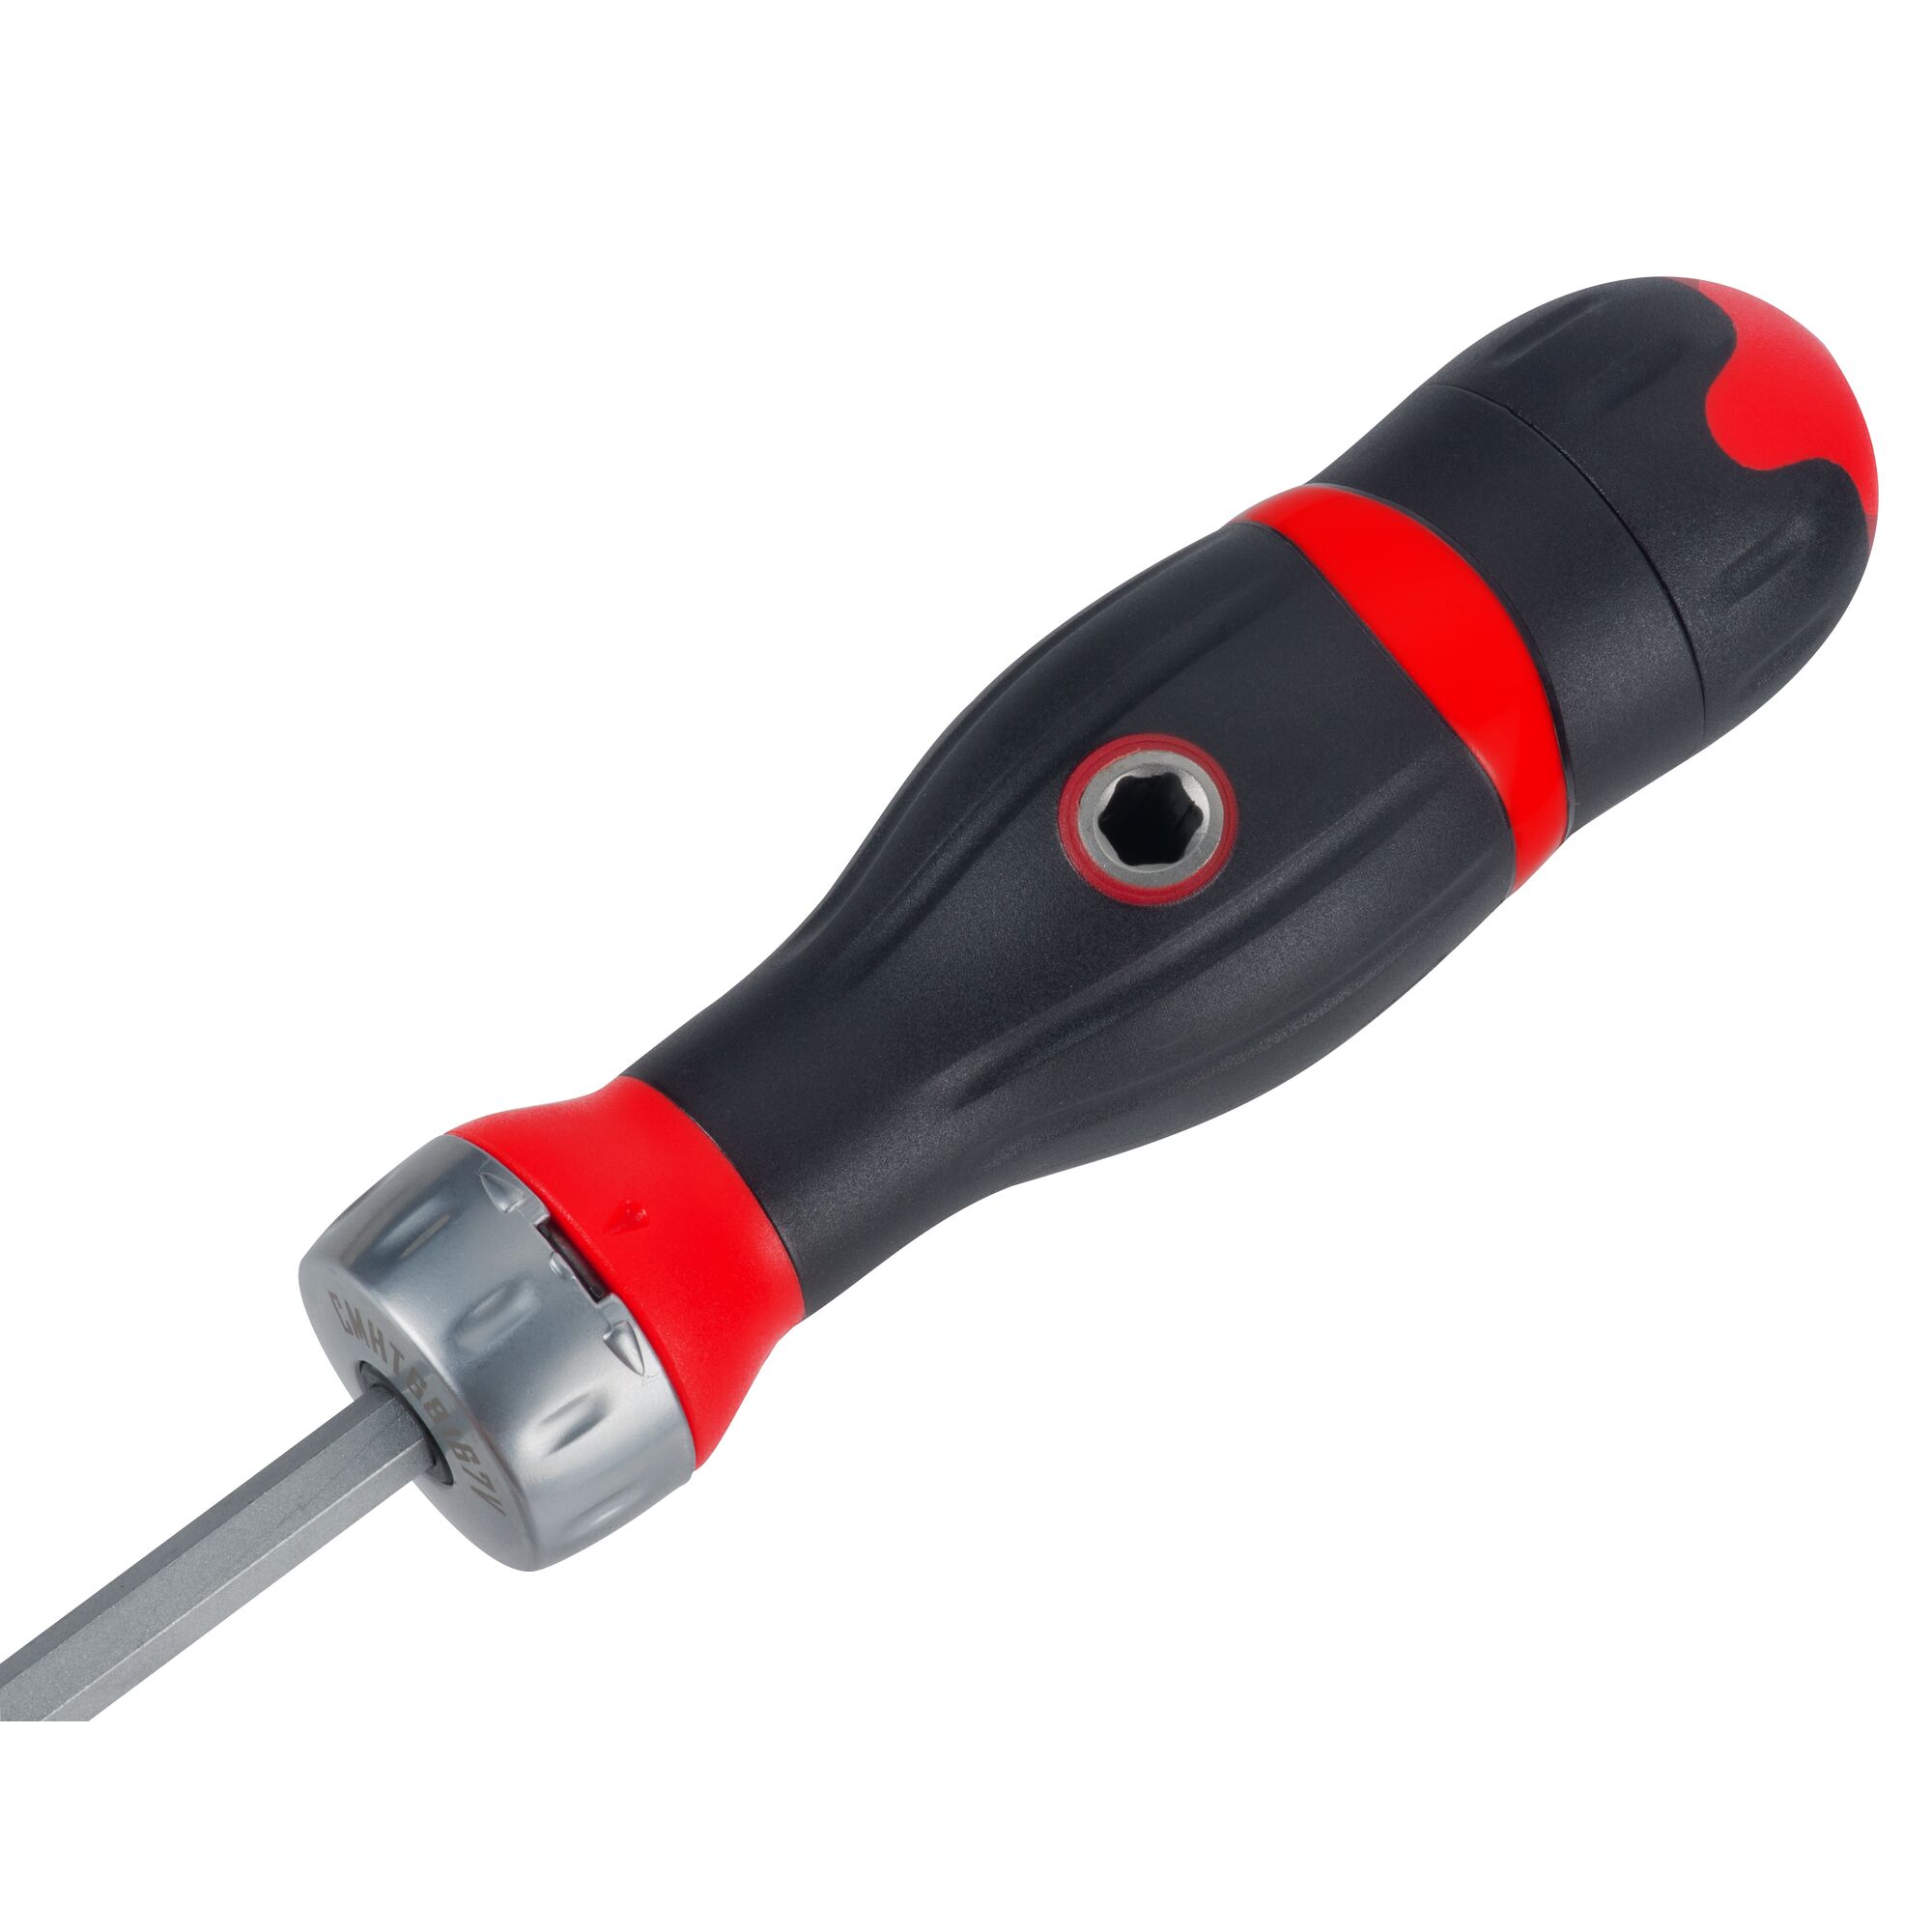 View of CRAFTSMAN Screwdrivers highlighting product features